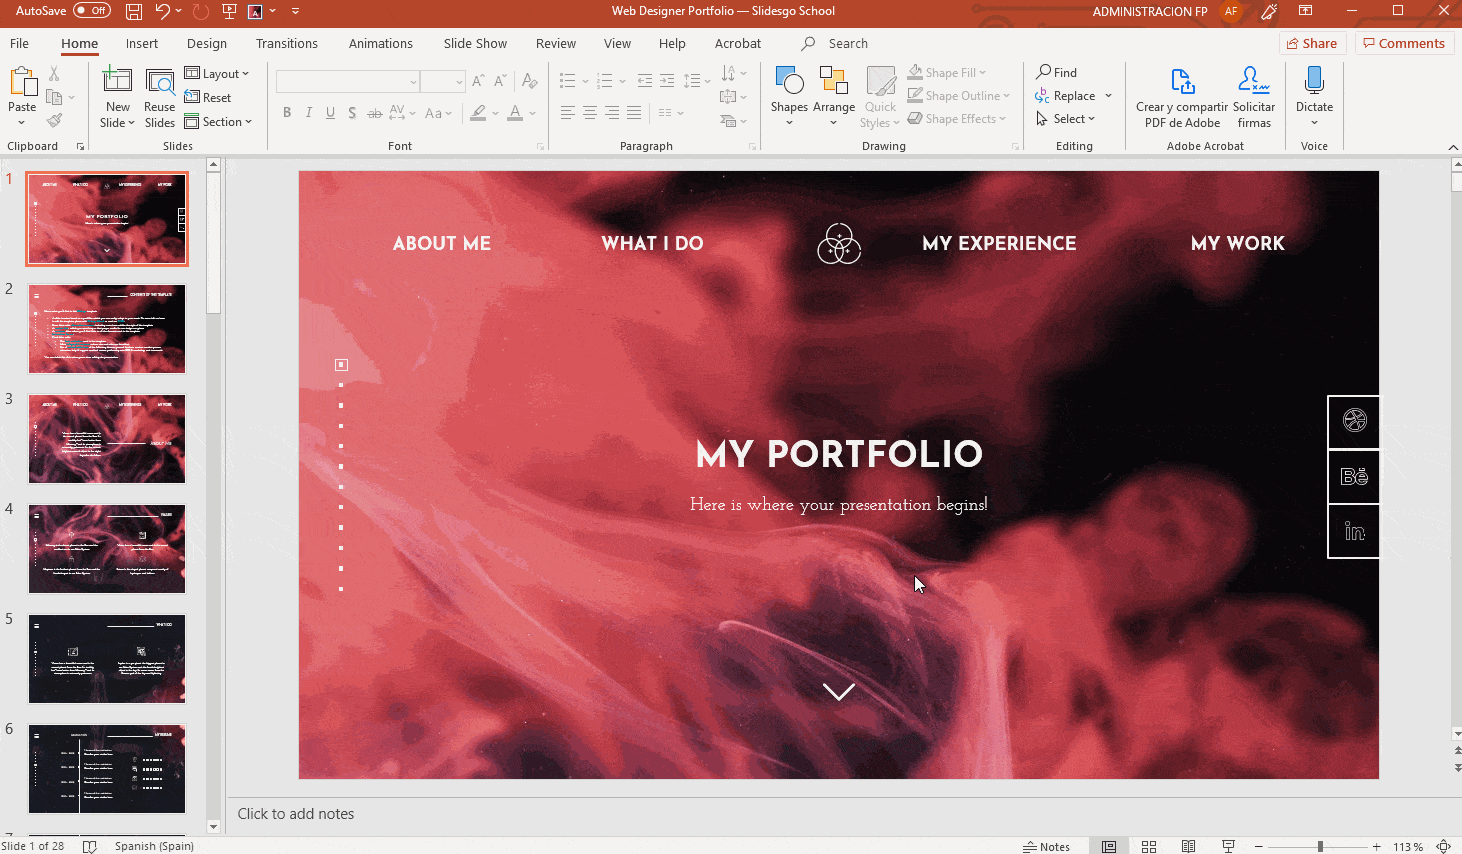 How to Insert, Crop or Mask Images in PowerPoint -6